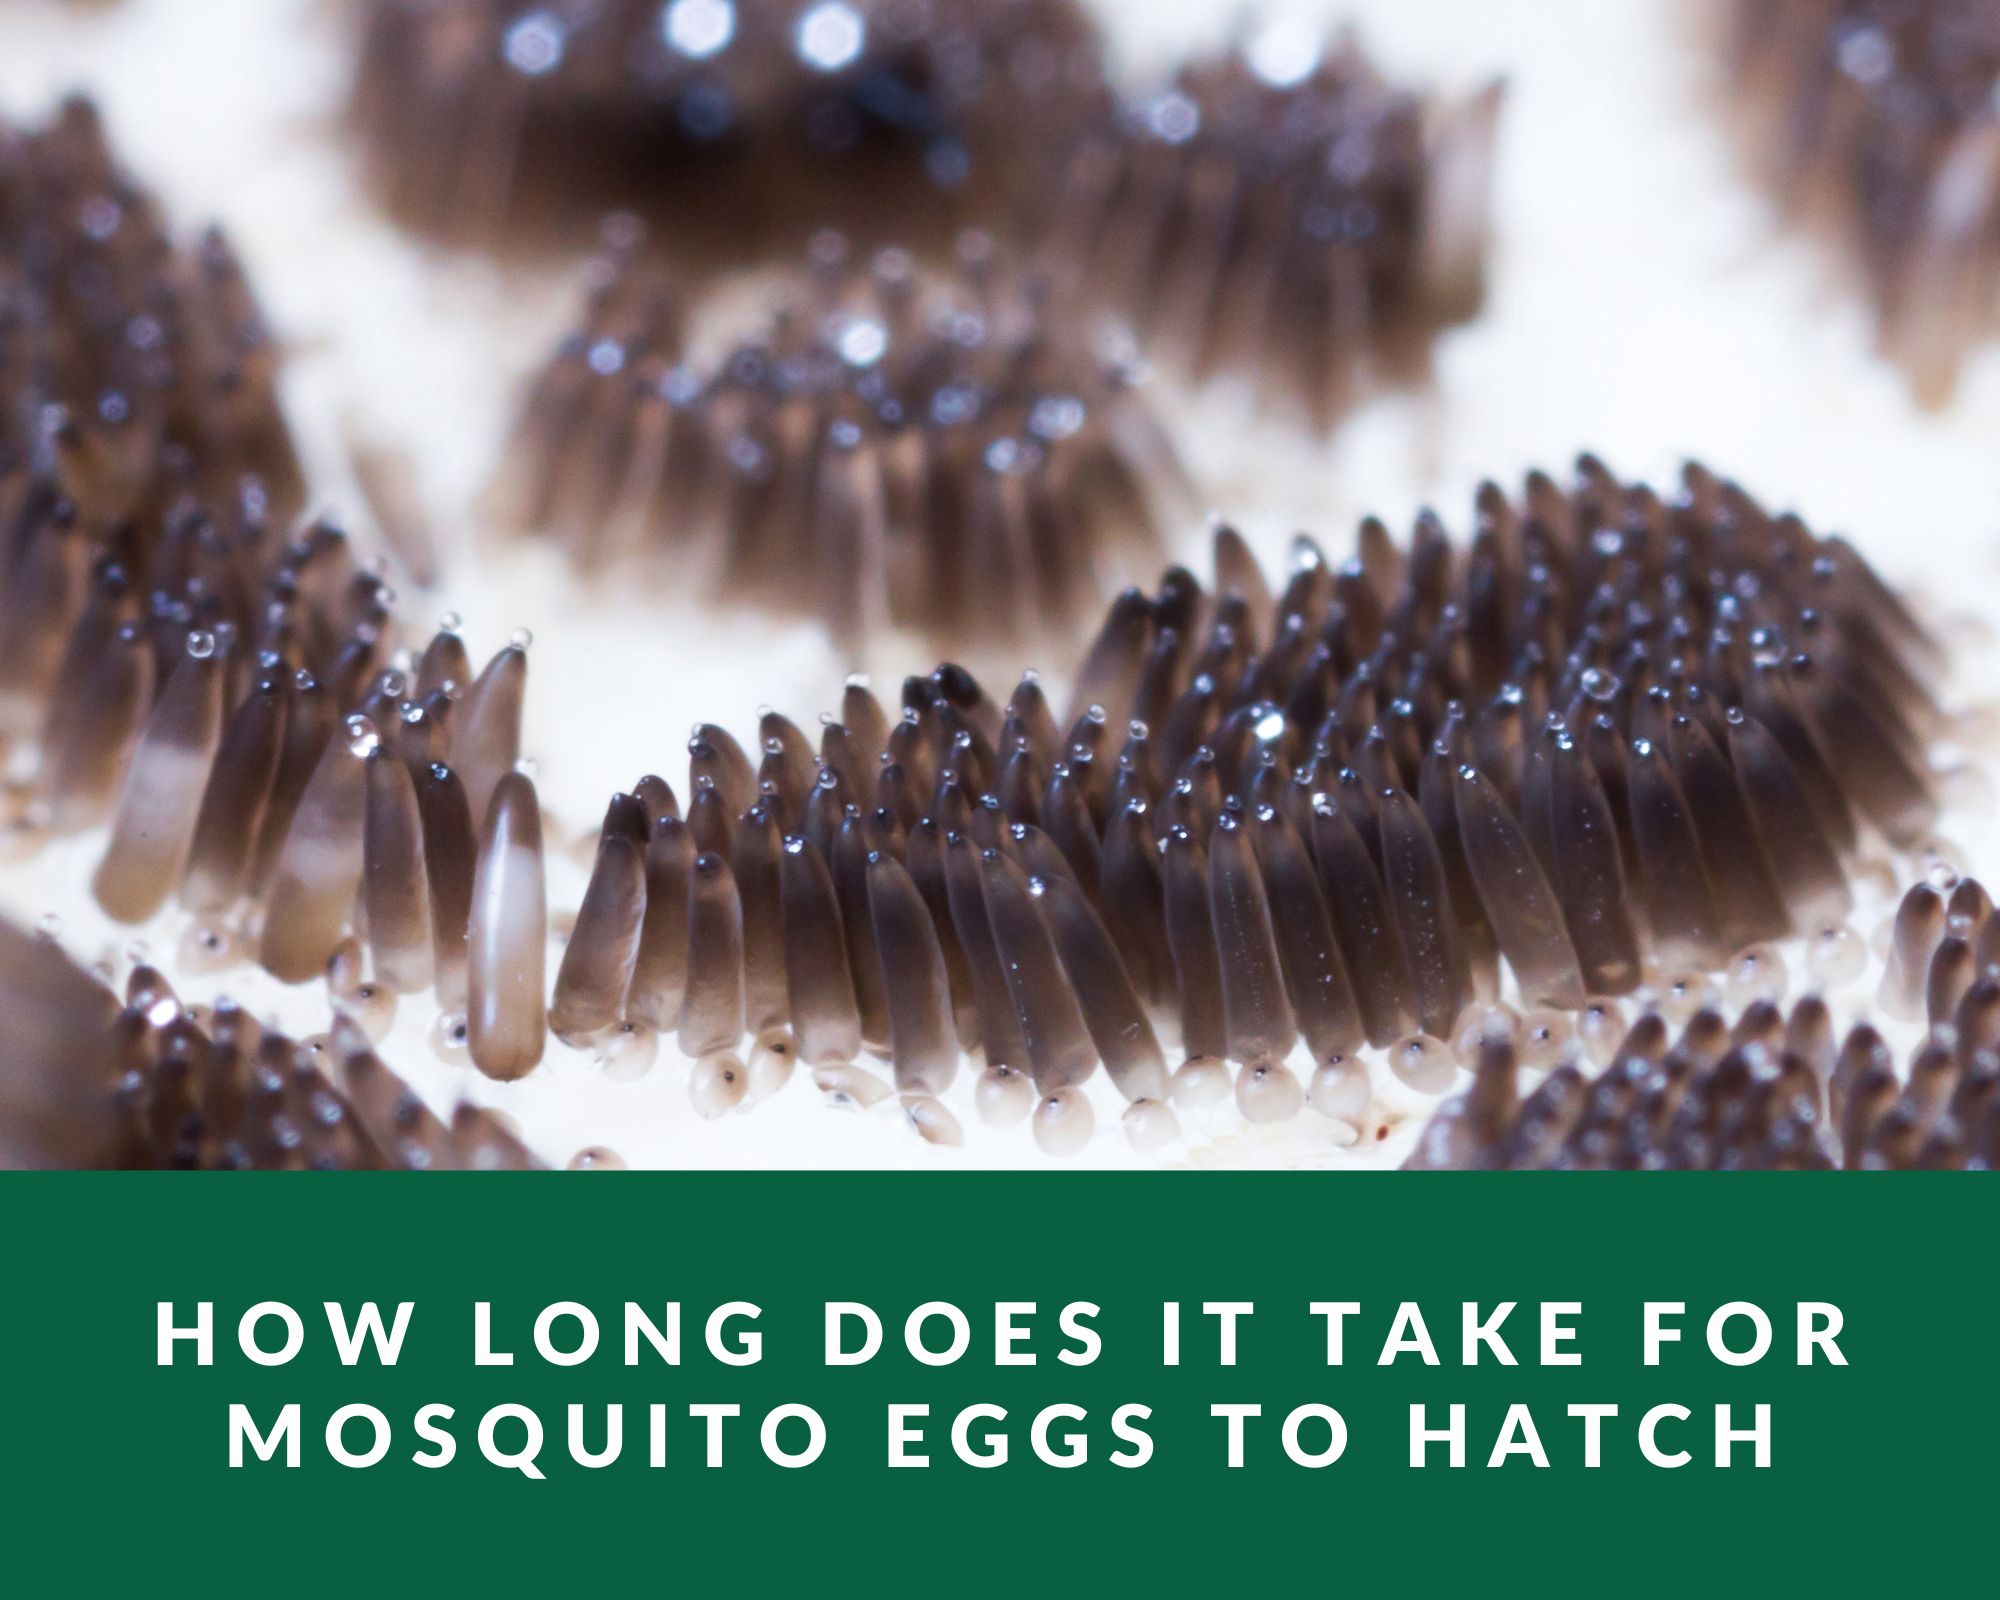 How long does it take for mosquito eggs to hatch